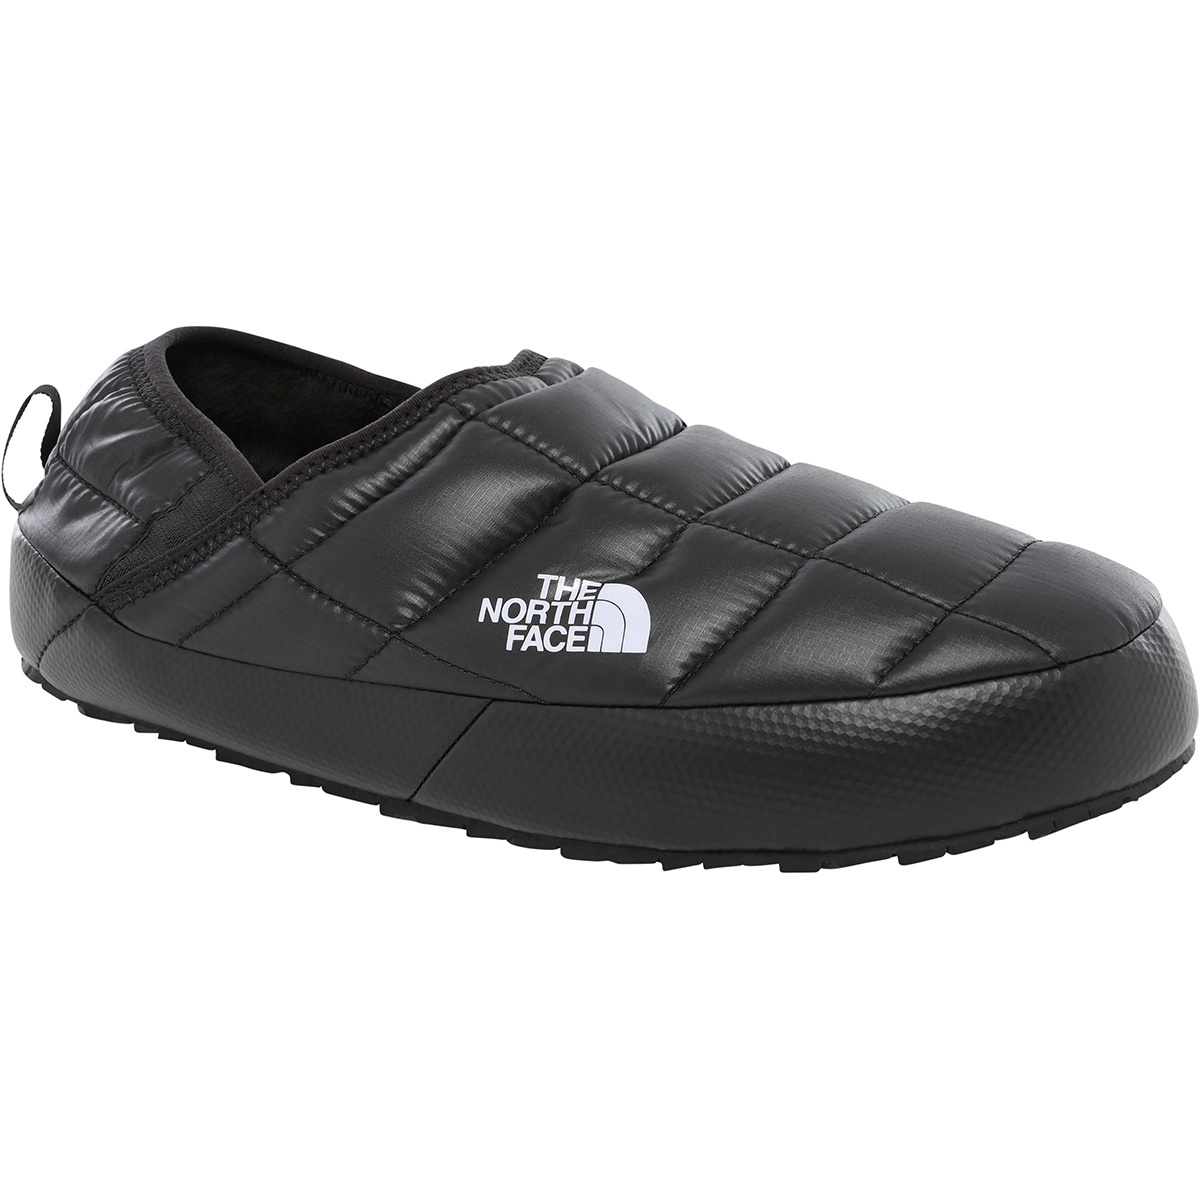 The North Face Herren Thermoball Traction Mule Schuhe von The North Face